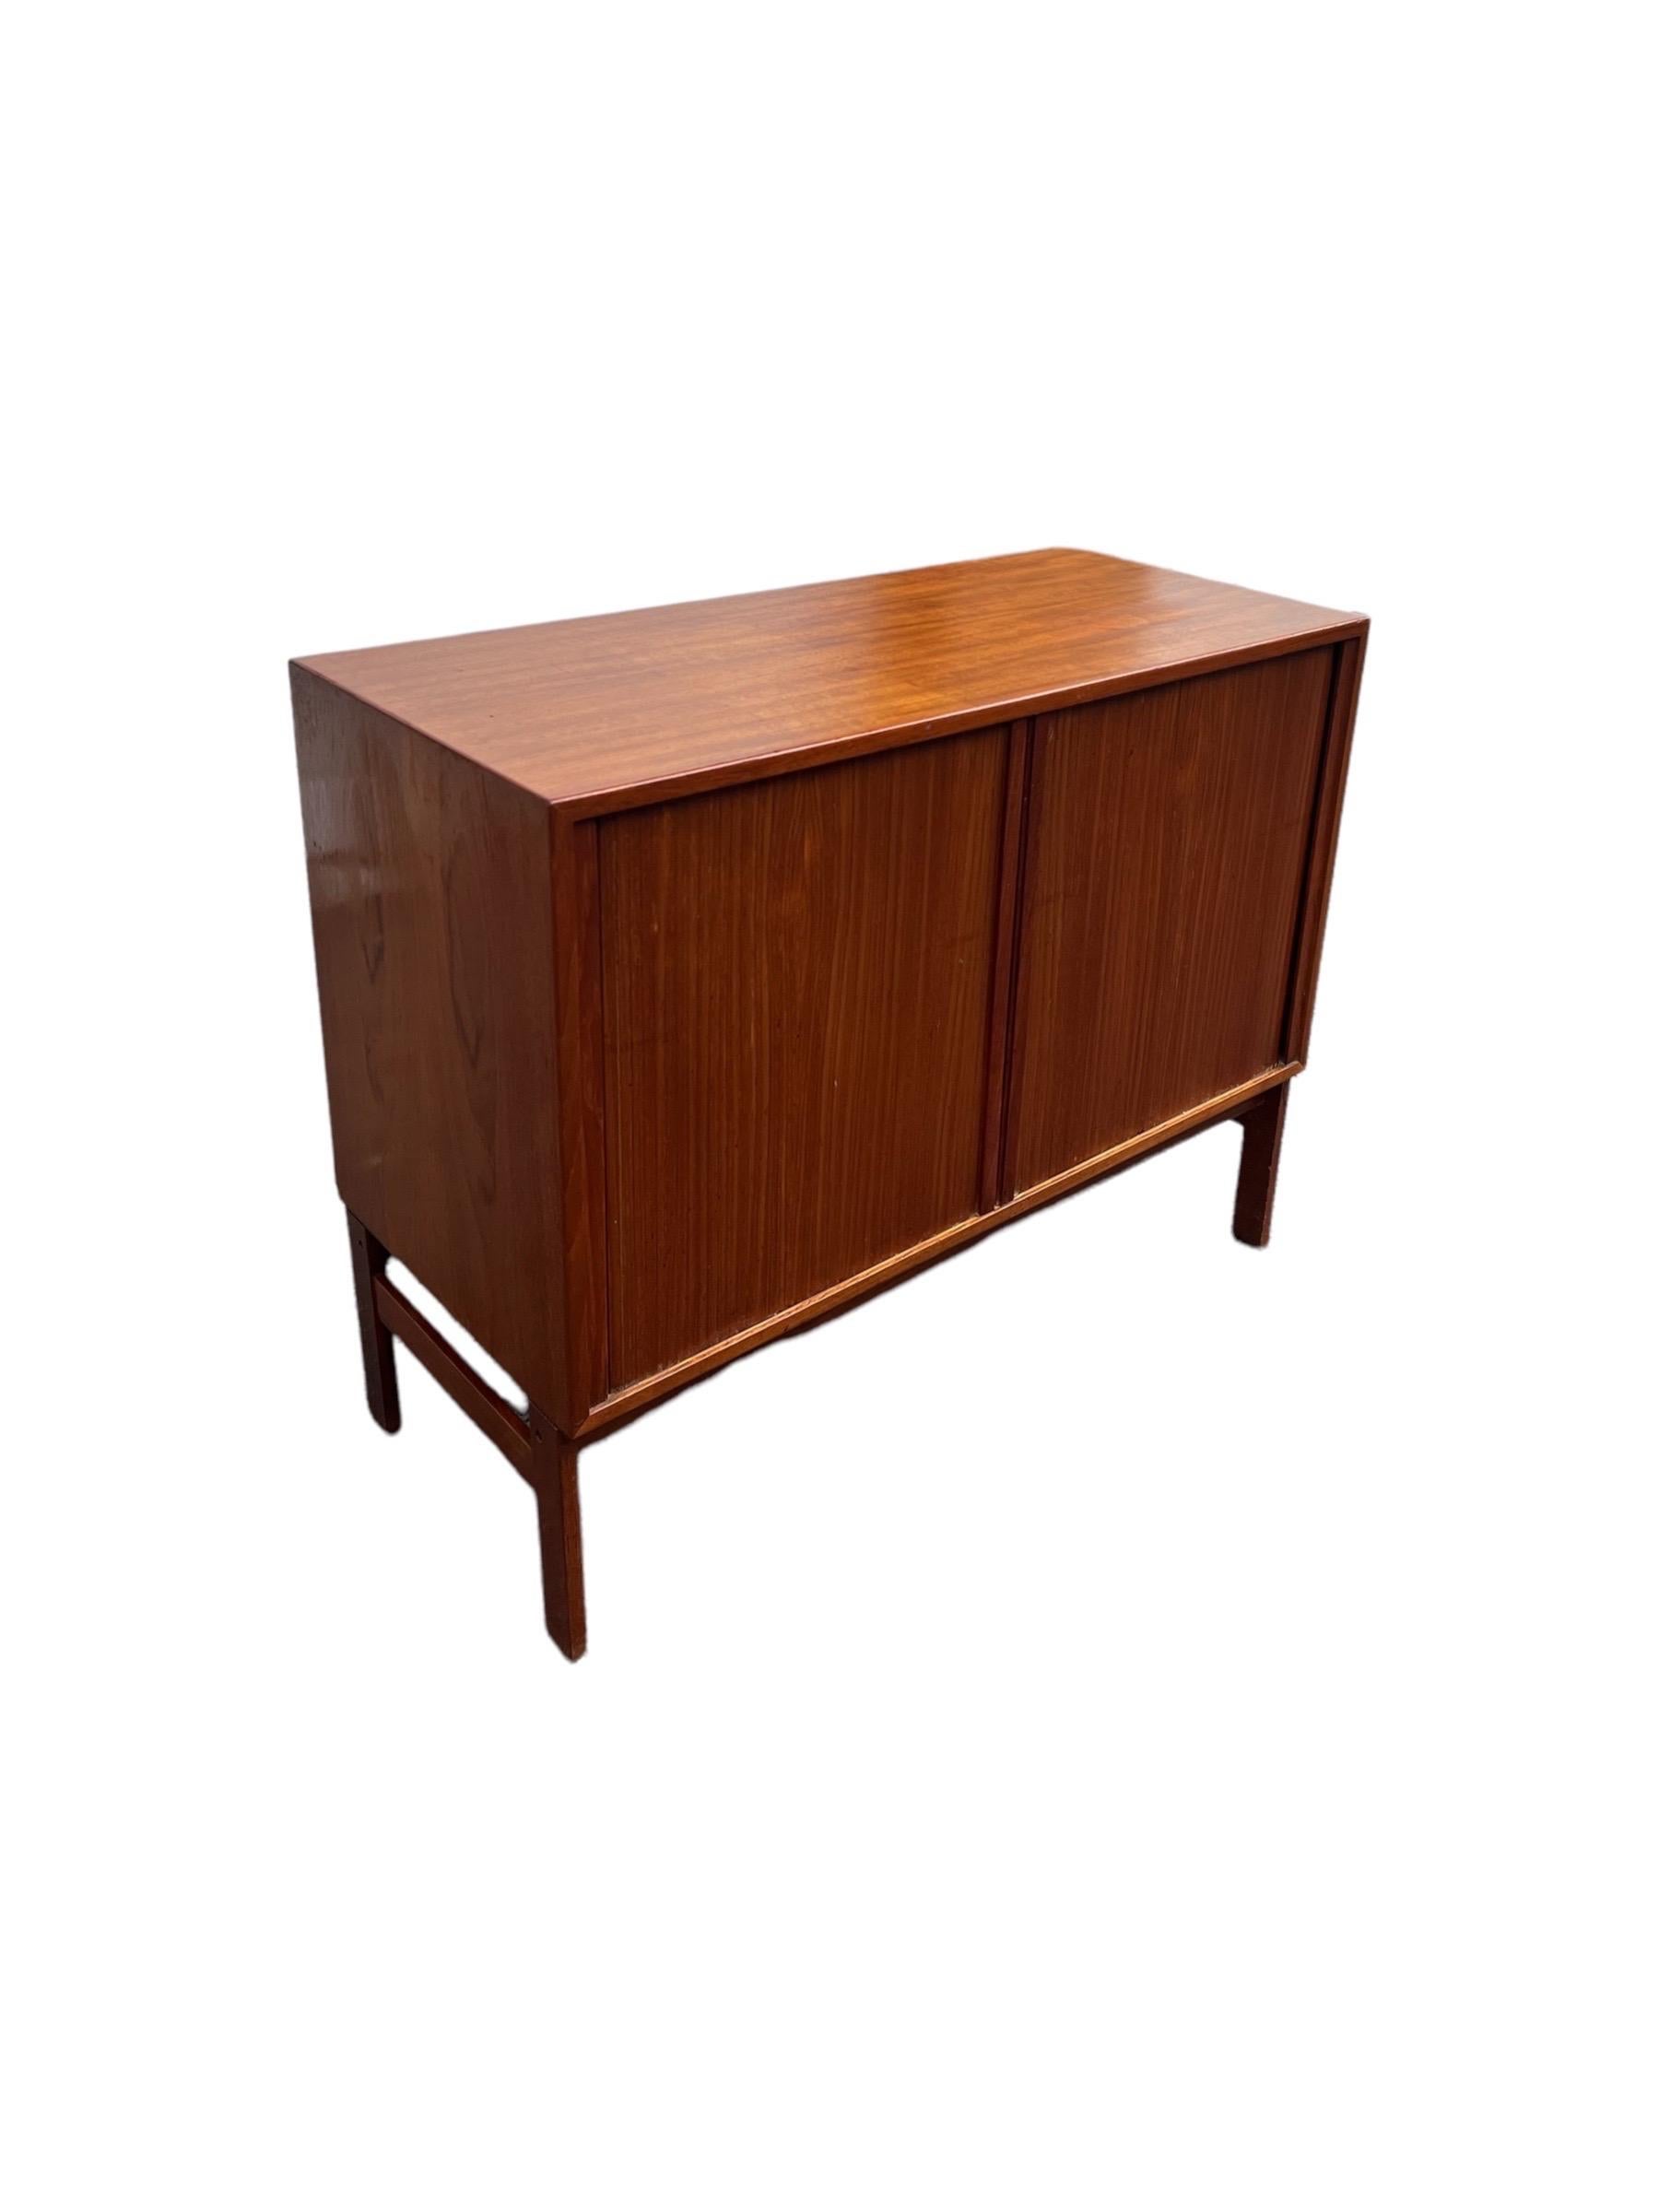 Vintage Danish Modern Tambour Door Record Cabinet of Credenza Imported In Good Condition For Sale In Seattle, WA